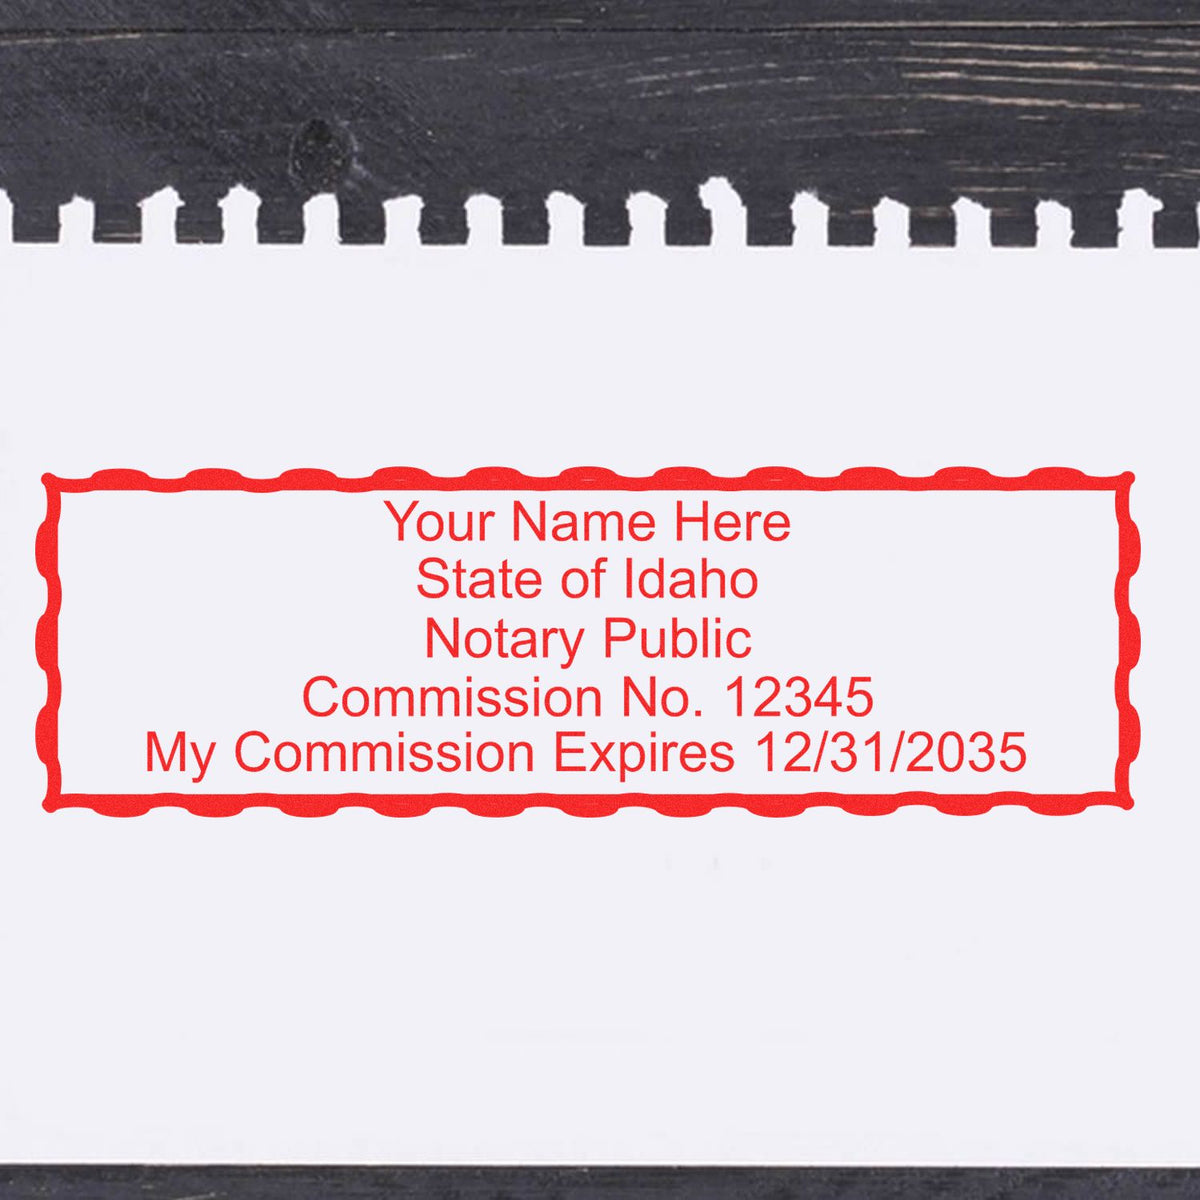 Another Example of a stamped impression of the Super Slim Idaho Notary Public Stamp on a piece of office paper.